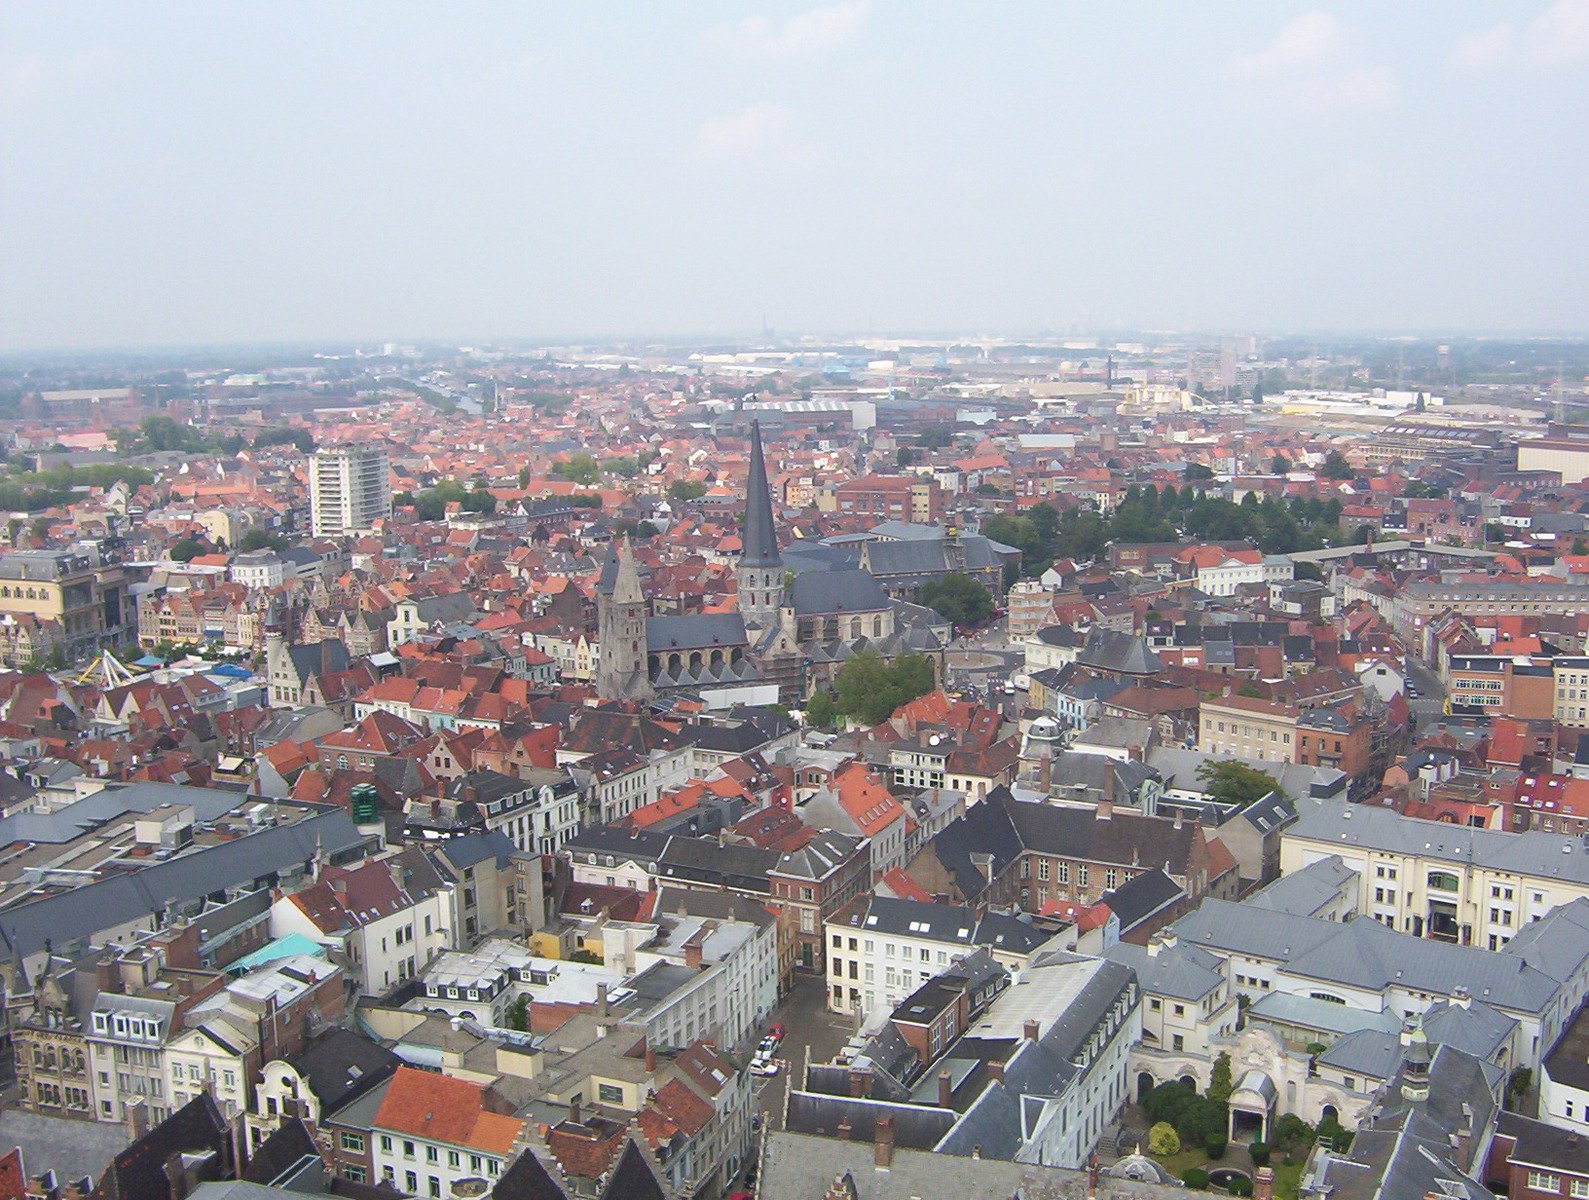 an overhead view of old town with many colorful rooftops